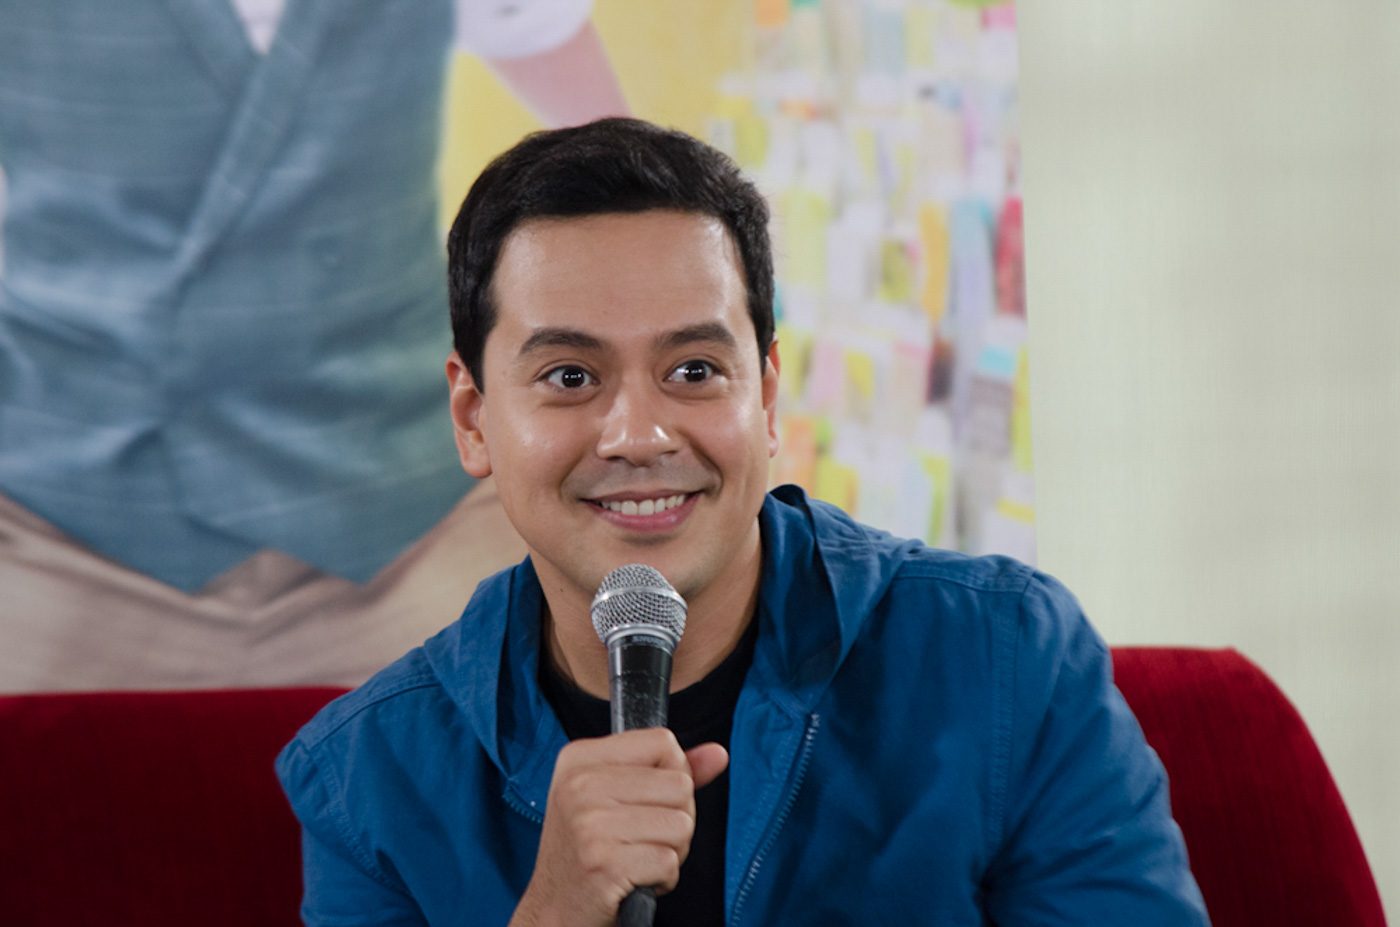 AVANT-GARDE. John Lloyd Cruz shares that people seem to be afraid of being honest today, and just avoid conflict.  